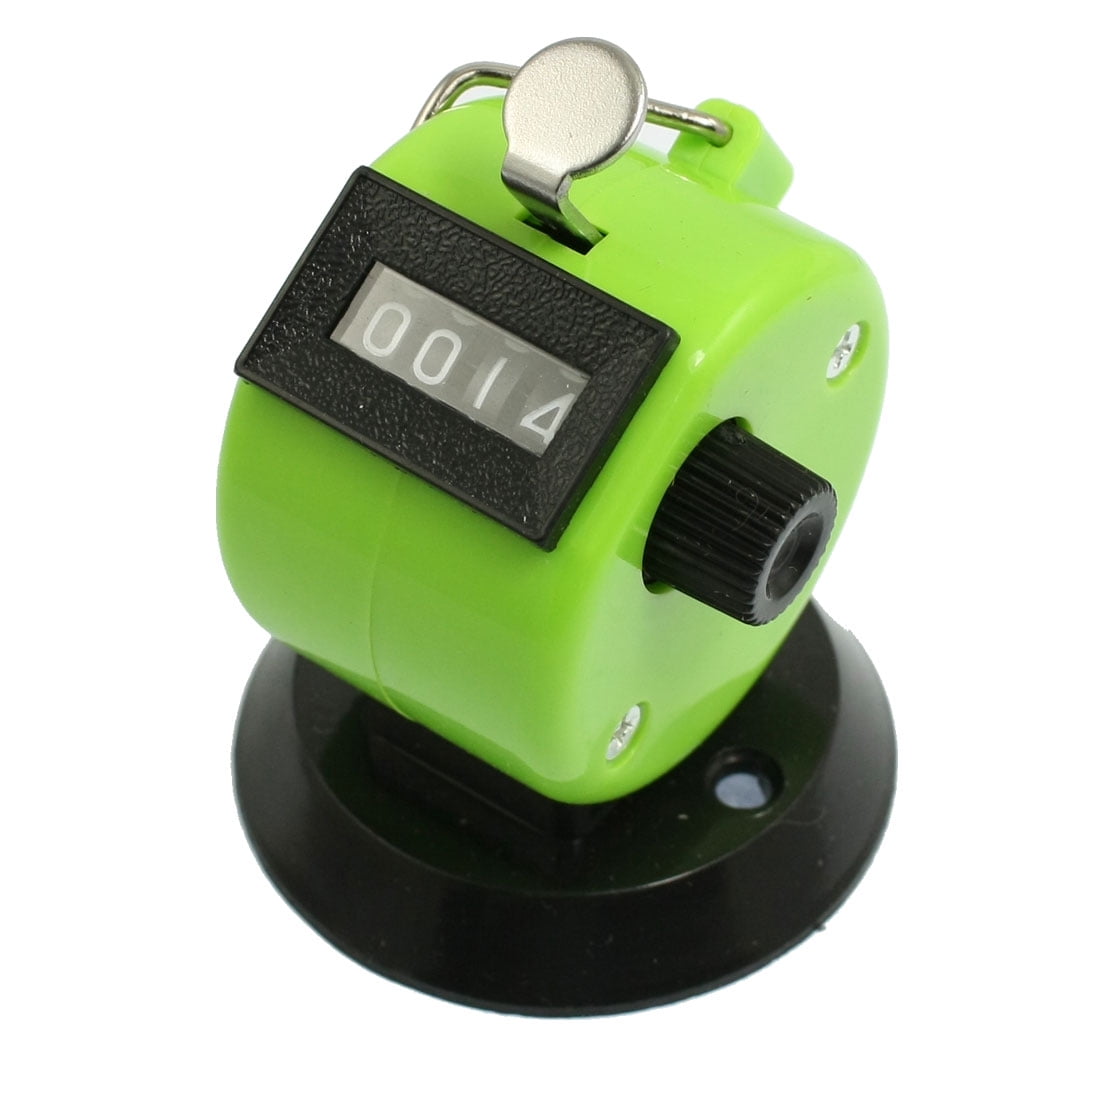 The Win Hand Held Tally Digit Mechanical Clicker Counter Green 